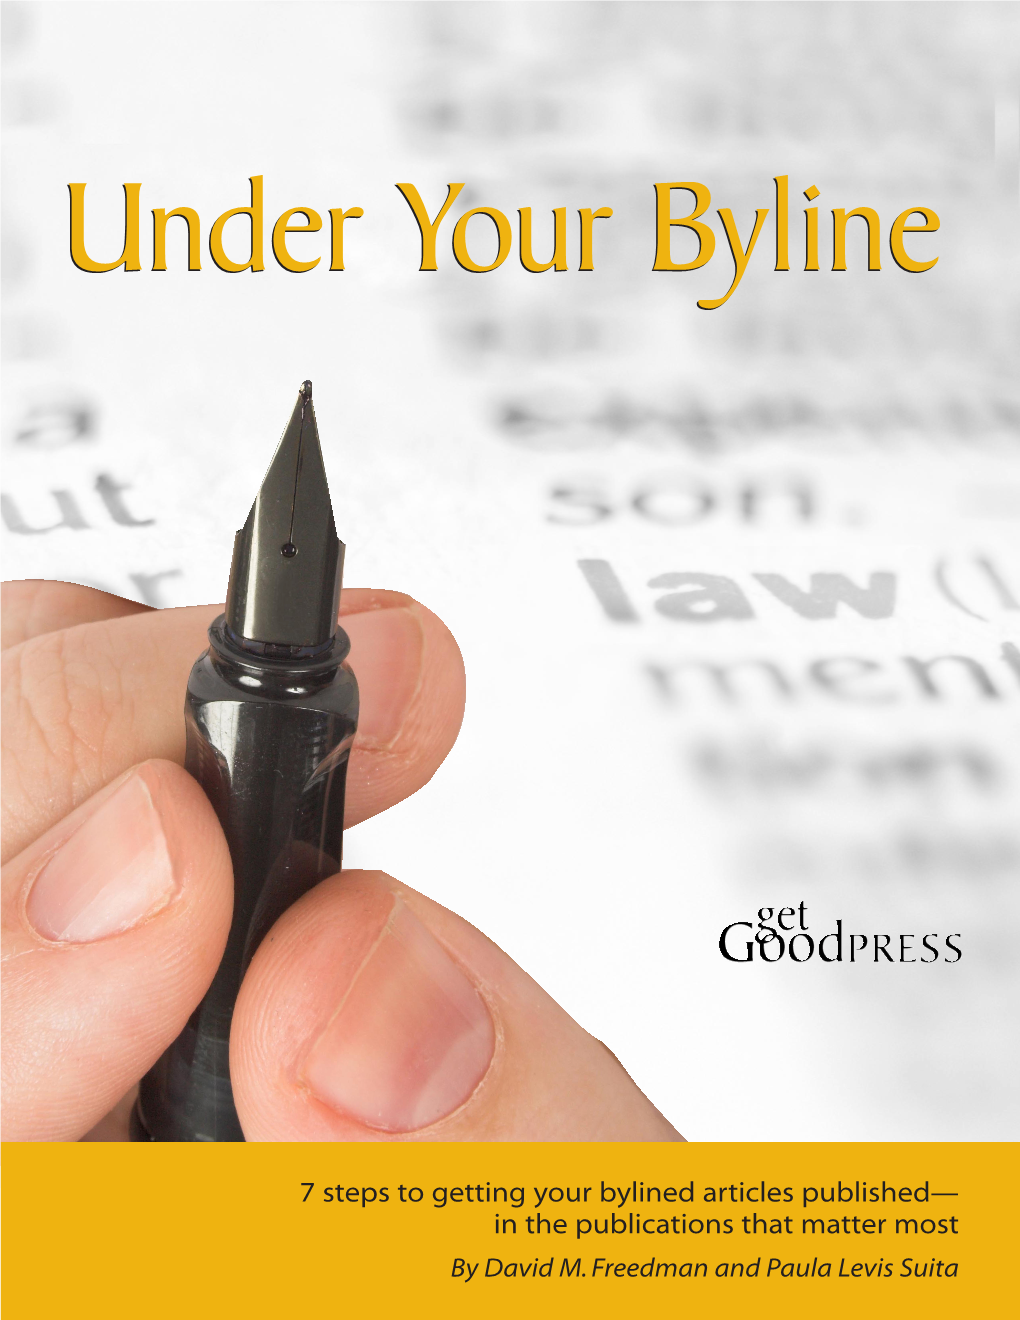 7 Steps to Getting Your Bylined Articles Published— in the Publications That Matter Most by David M